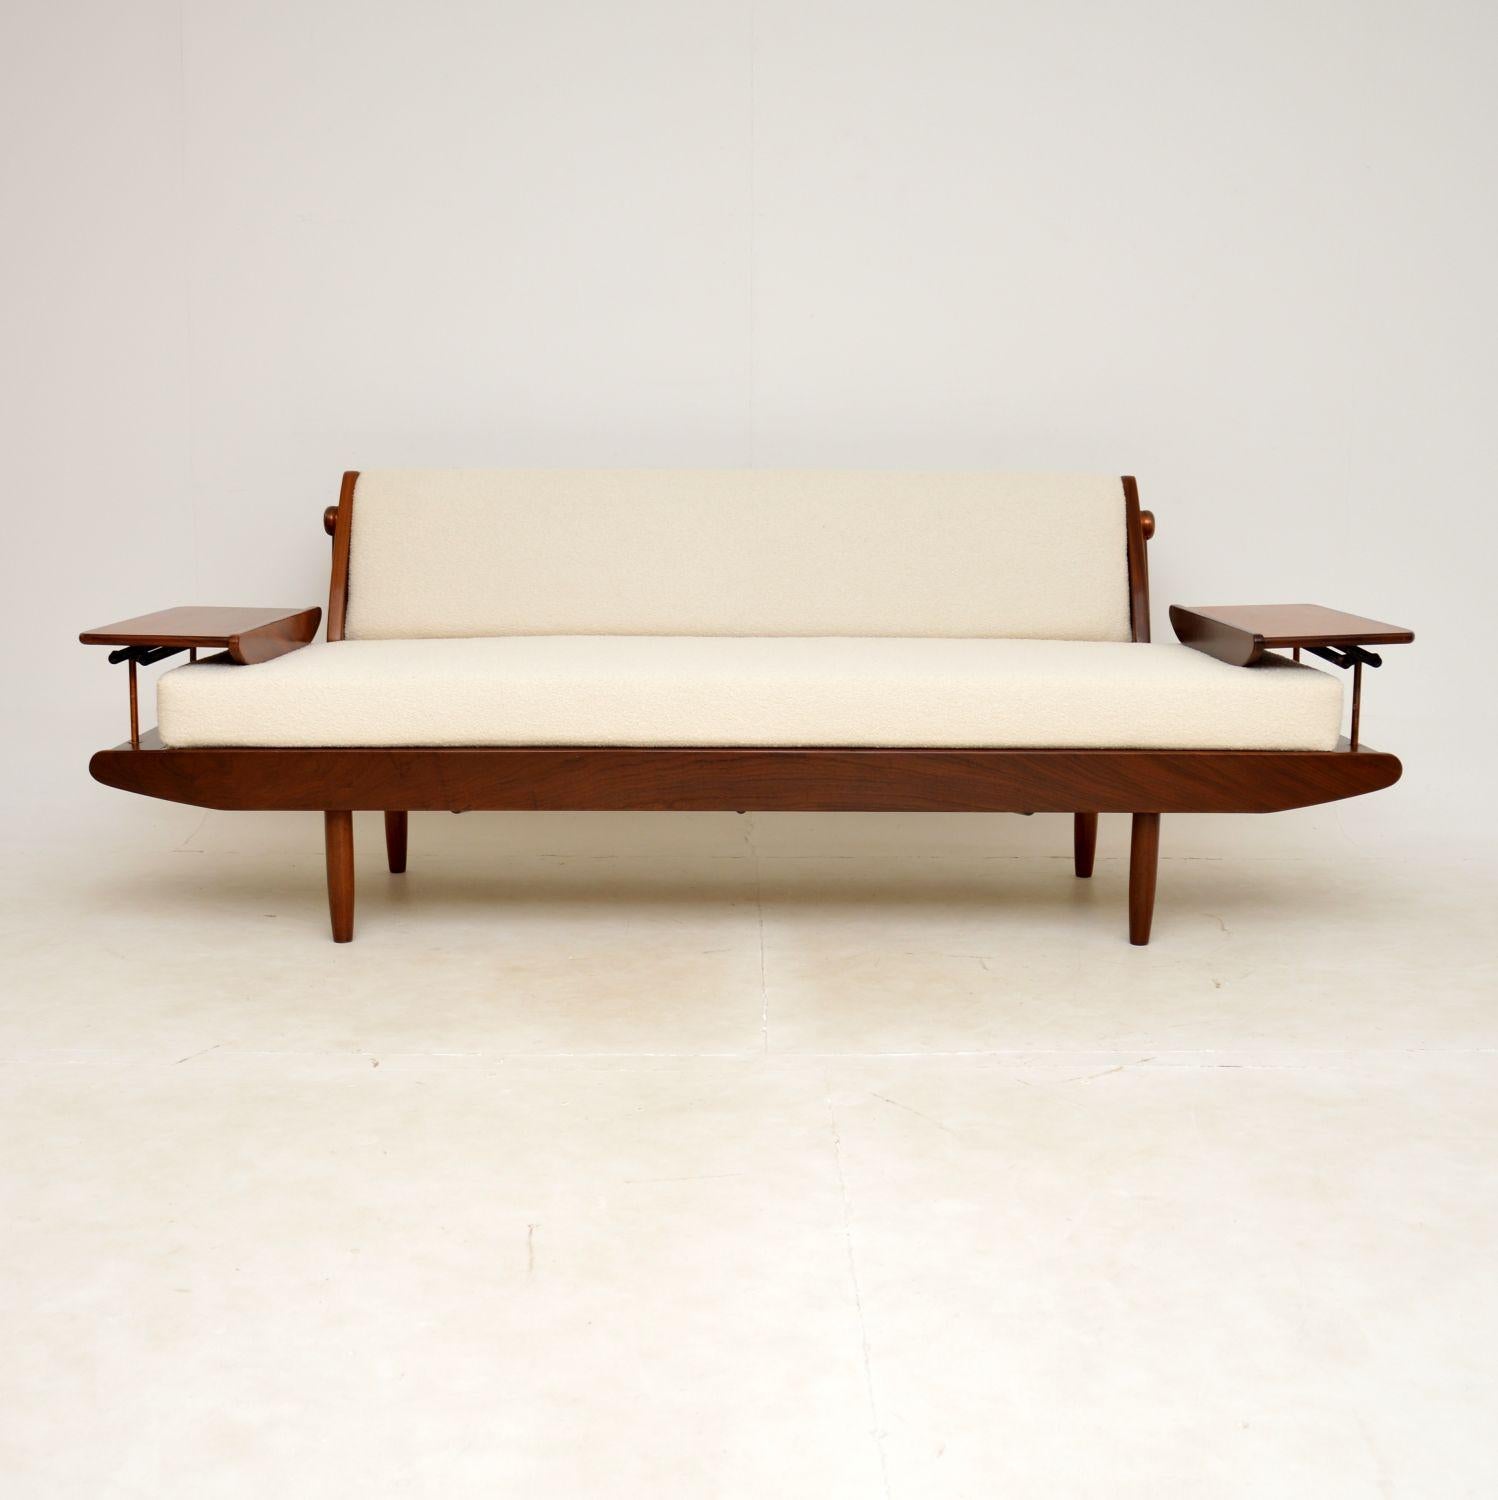 An outstanding and very rare vintage sofa bed. This was made by Toothill furniture in England, it dates from the 1960’s.

These were originally retailed in Heal’s in the 1960’s, the quality is absolutely amazing. This has an absolutely gorgeous